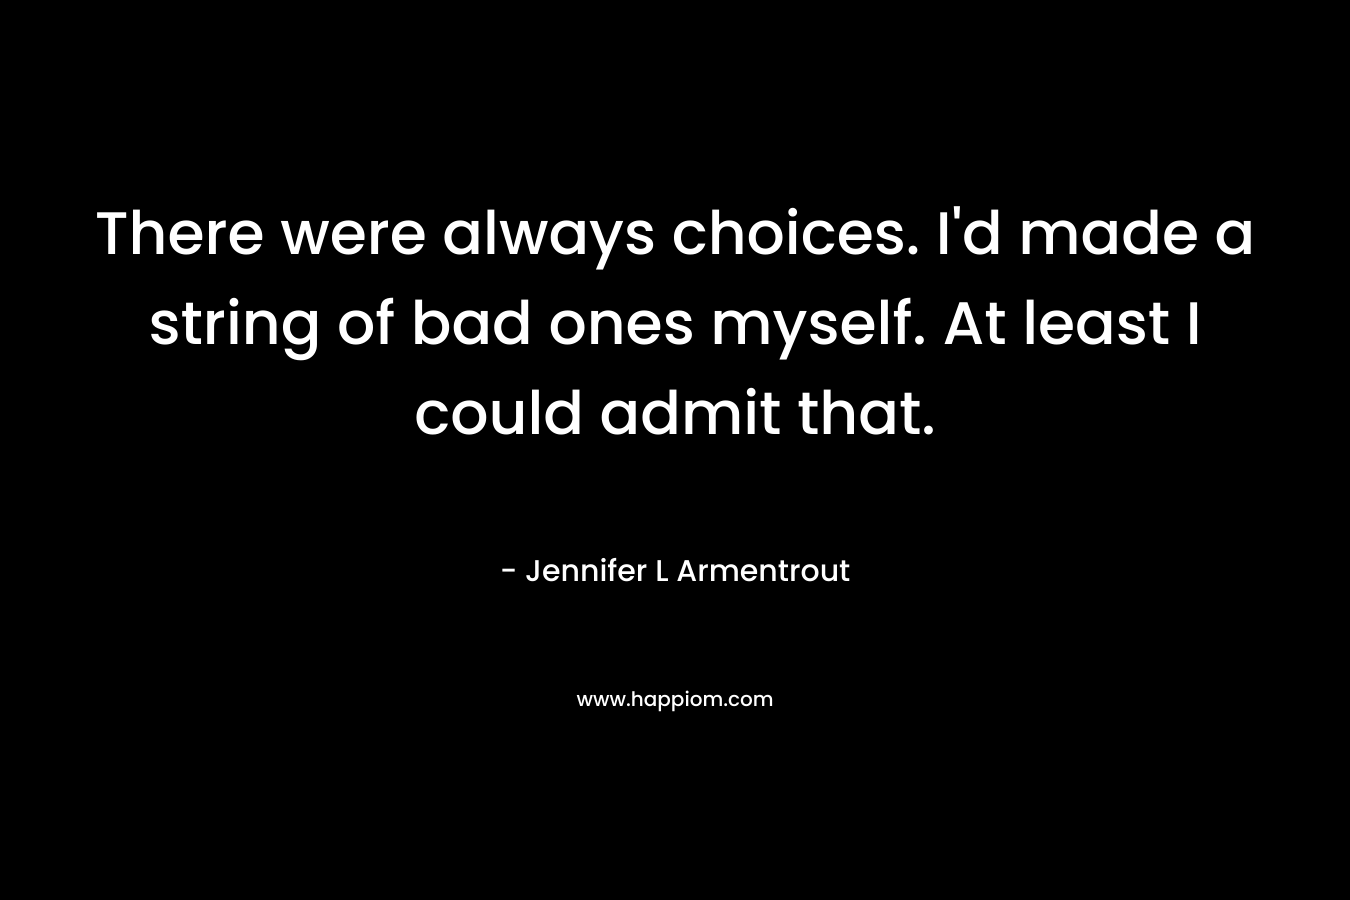 There were always choices. I’d made a string of bad ones myself. At least I could admit that. – Jennifer L Armentrout